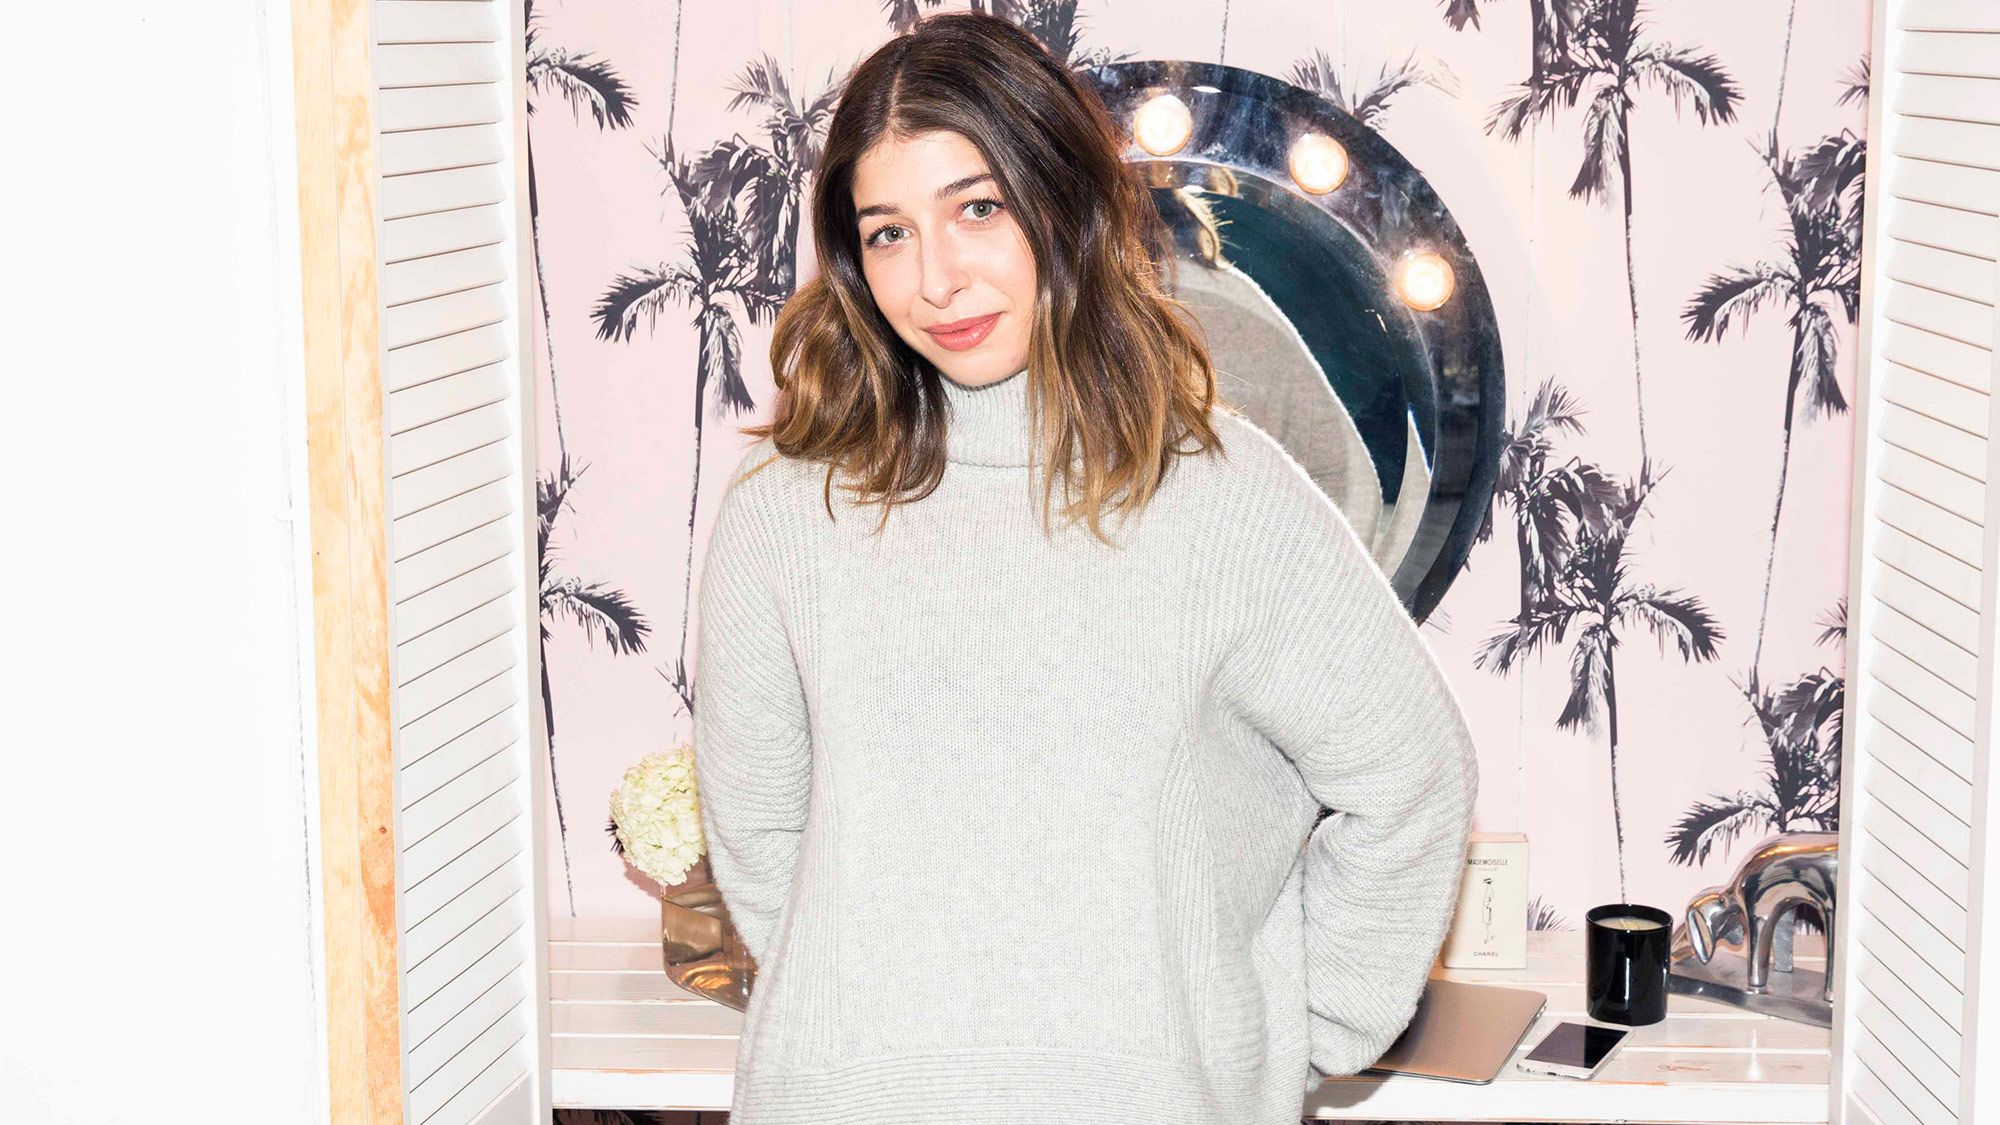 How to Build a Brand According to Coveteur Co-Founder Stephanie Mark